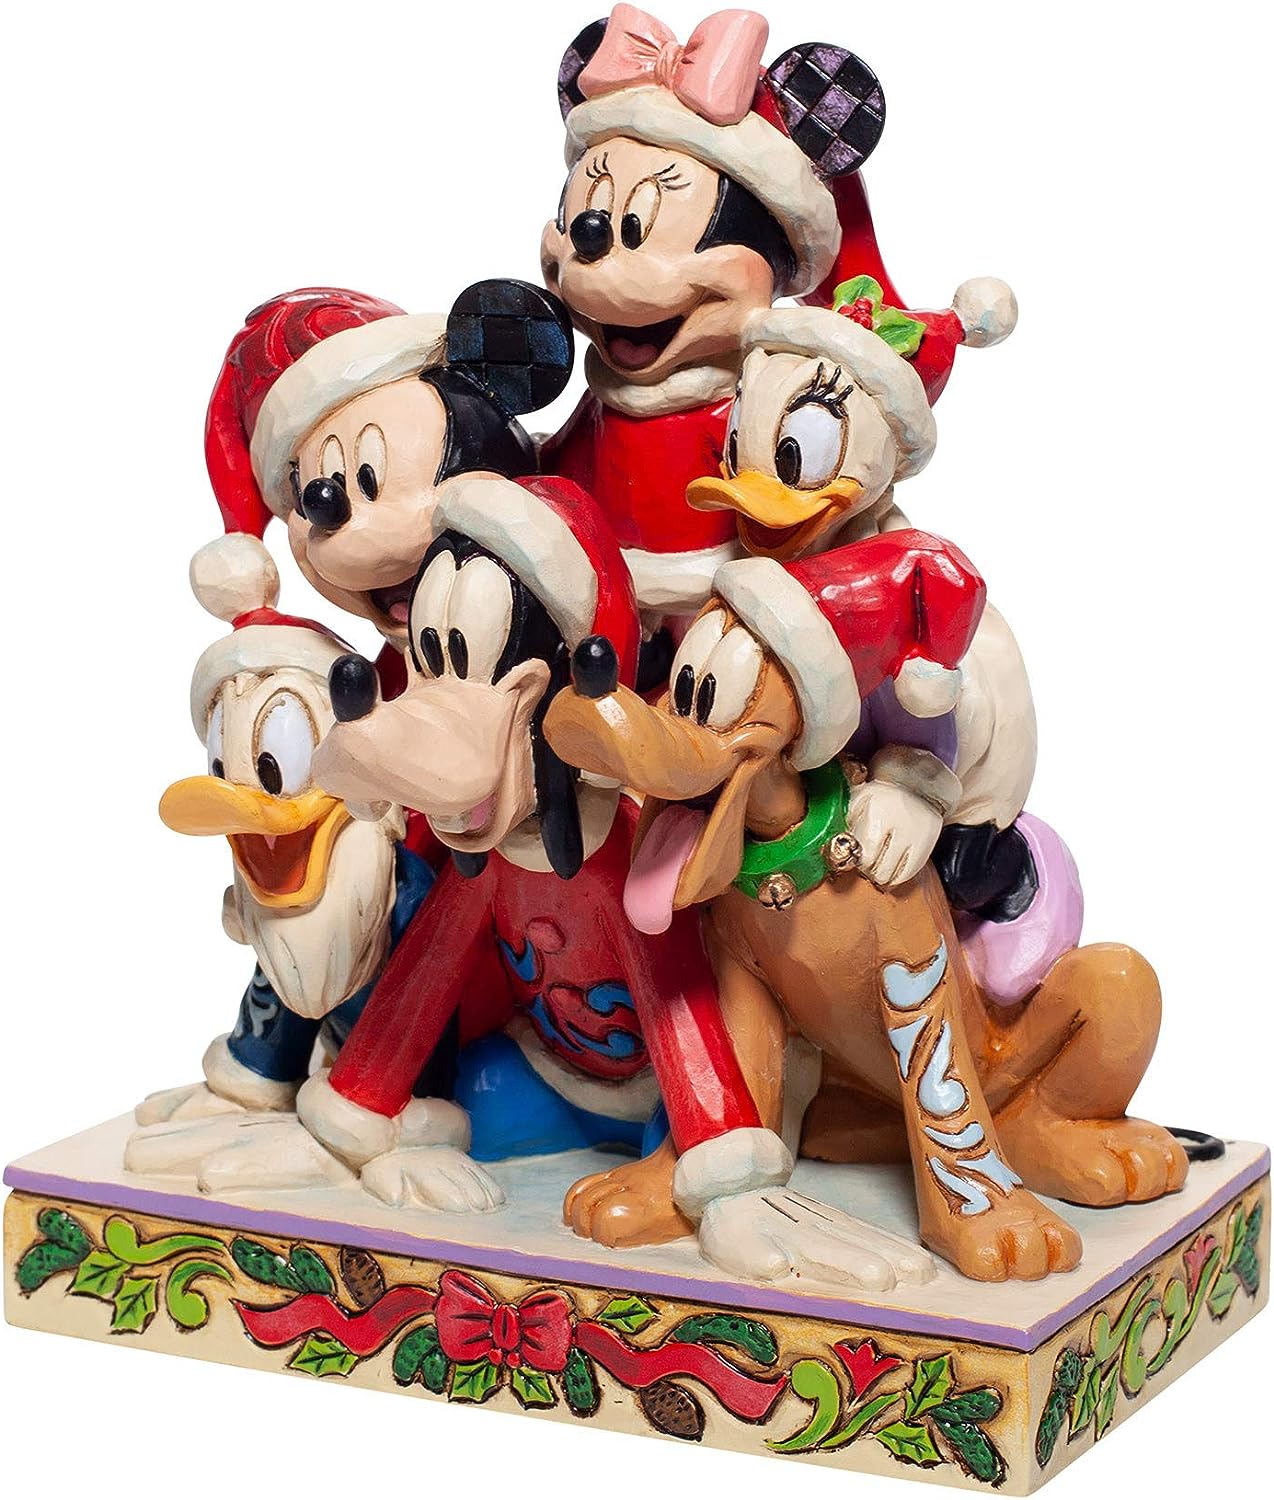 Piled-High-Holiday-Cheer-Mickey-Goofy-Donald-Minnie-Pluto-berlindeluxe-hunde-maeuse-seite